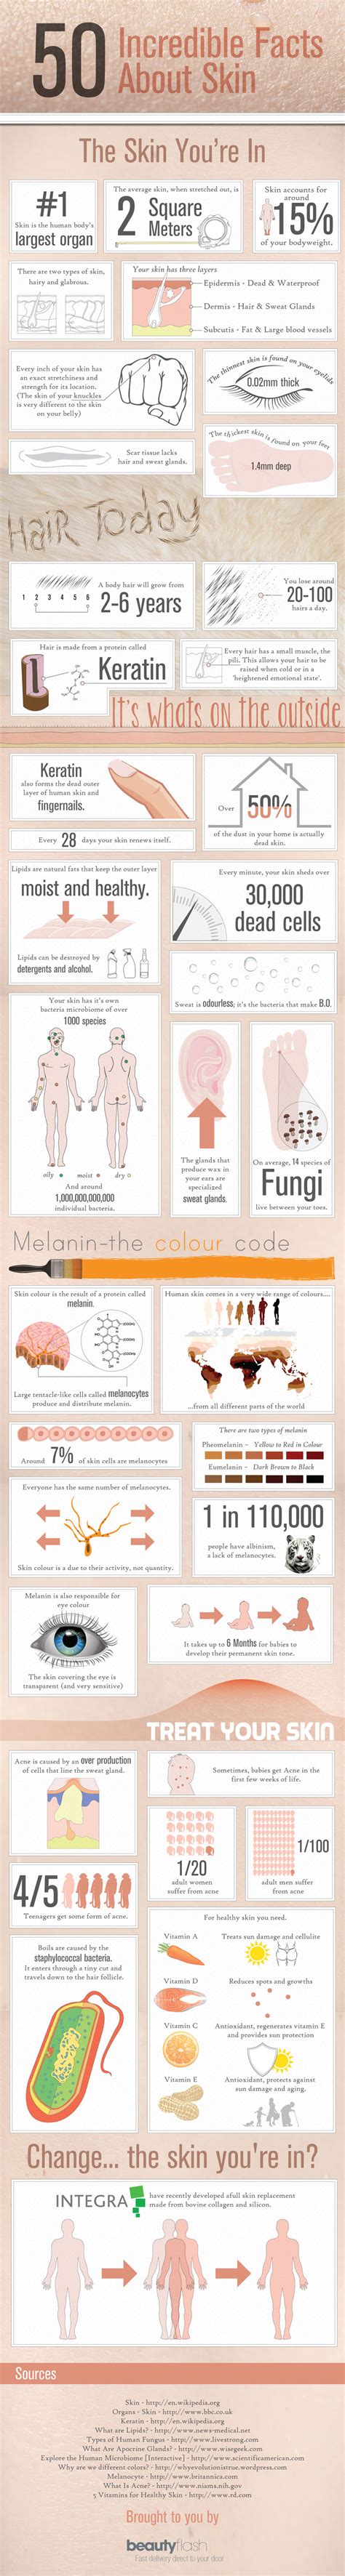 50 Incredible Facts About Skin Infographic Infographic List